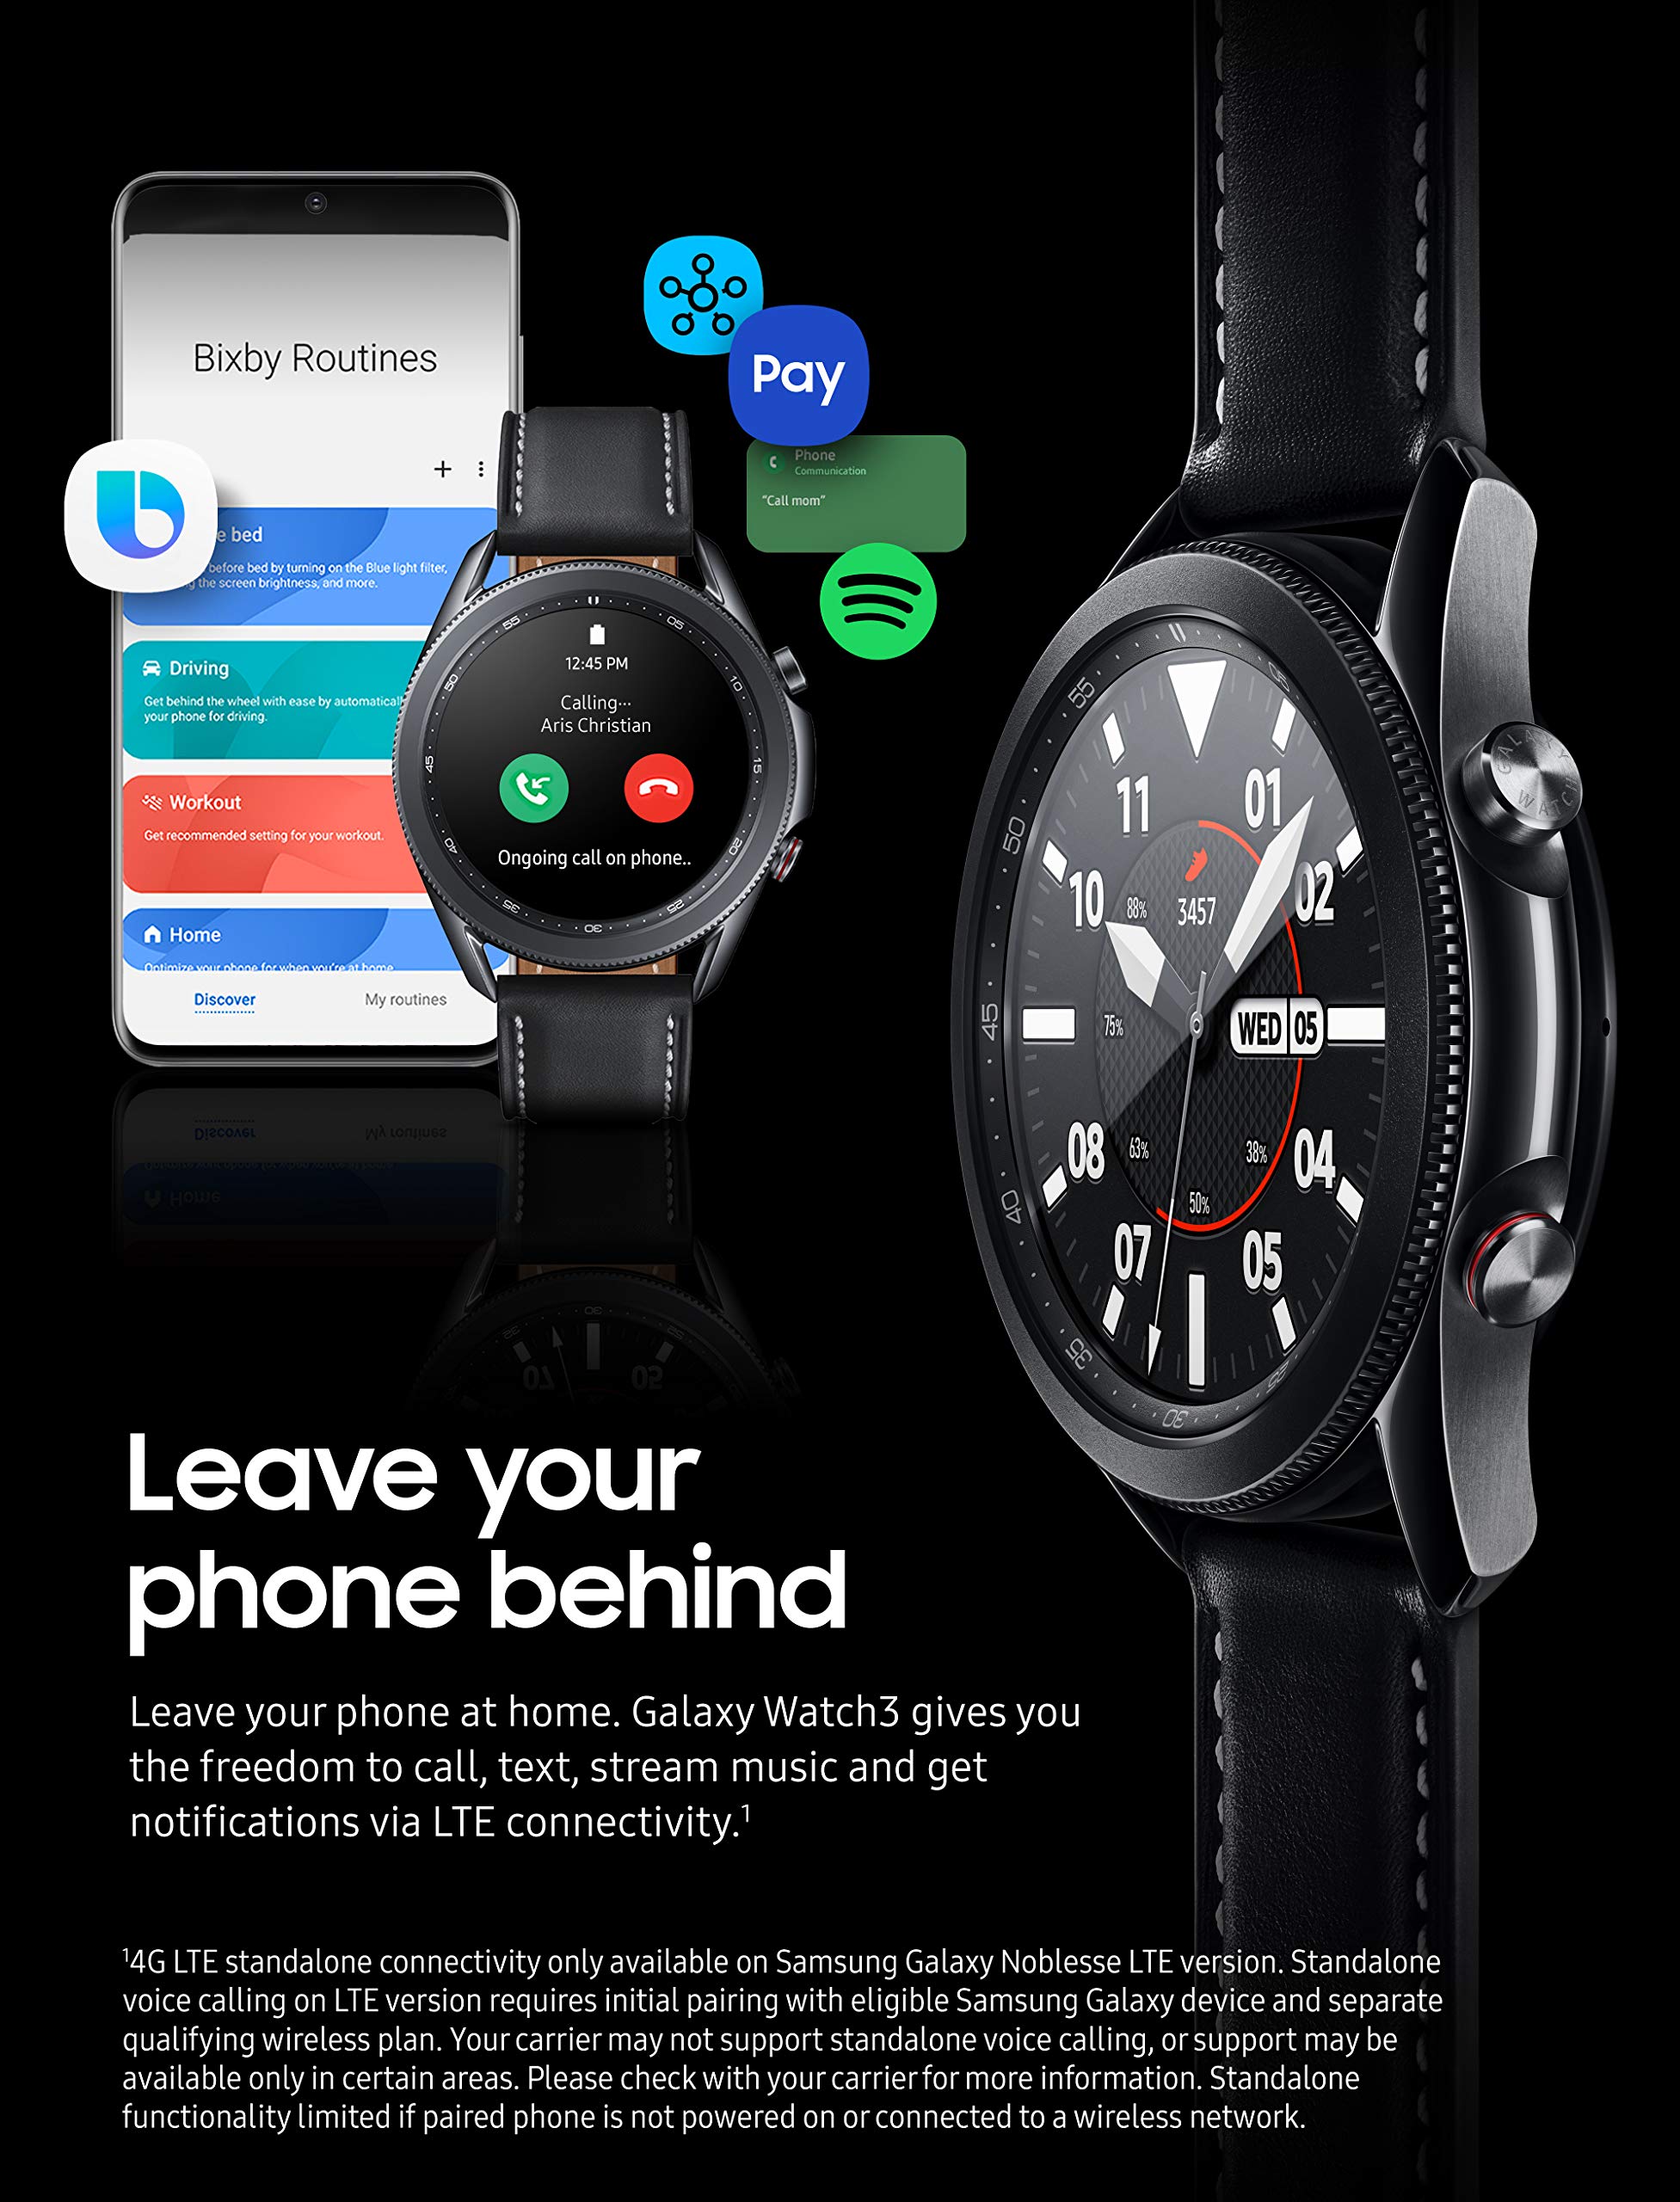 SAMSUNG Galaxy Watch 3 (45mm, GPS, Bluetooth, Unlocked LTE) Smart Watch with Advanced Health Monitoring, Fitness Tracking, and Long Lasting Battery - Mystic Black (US Version)